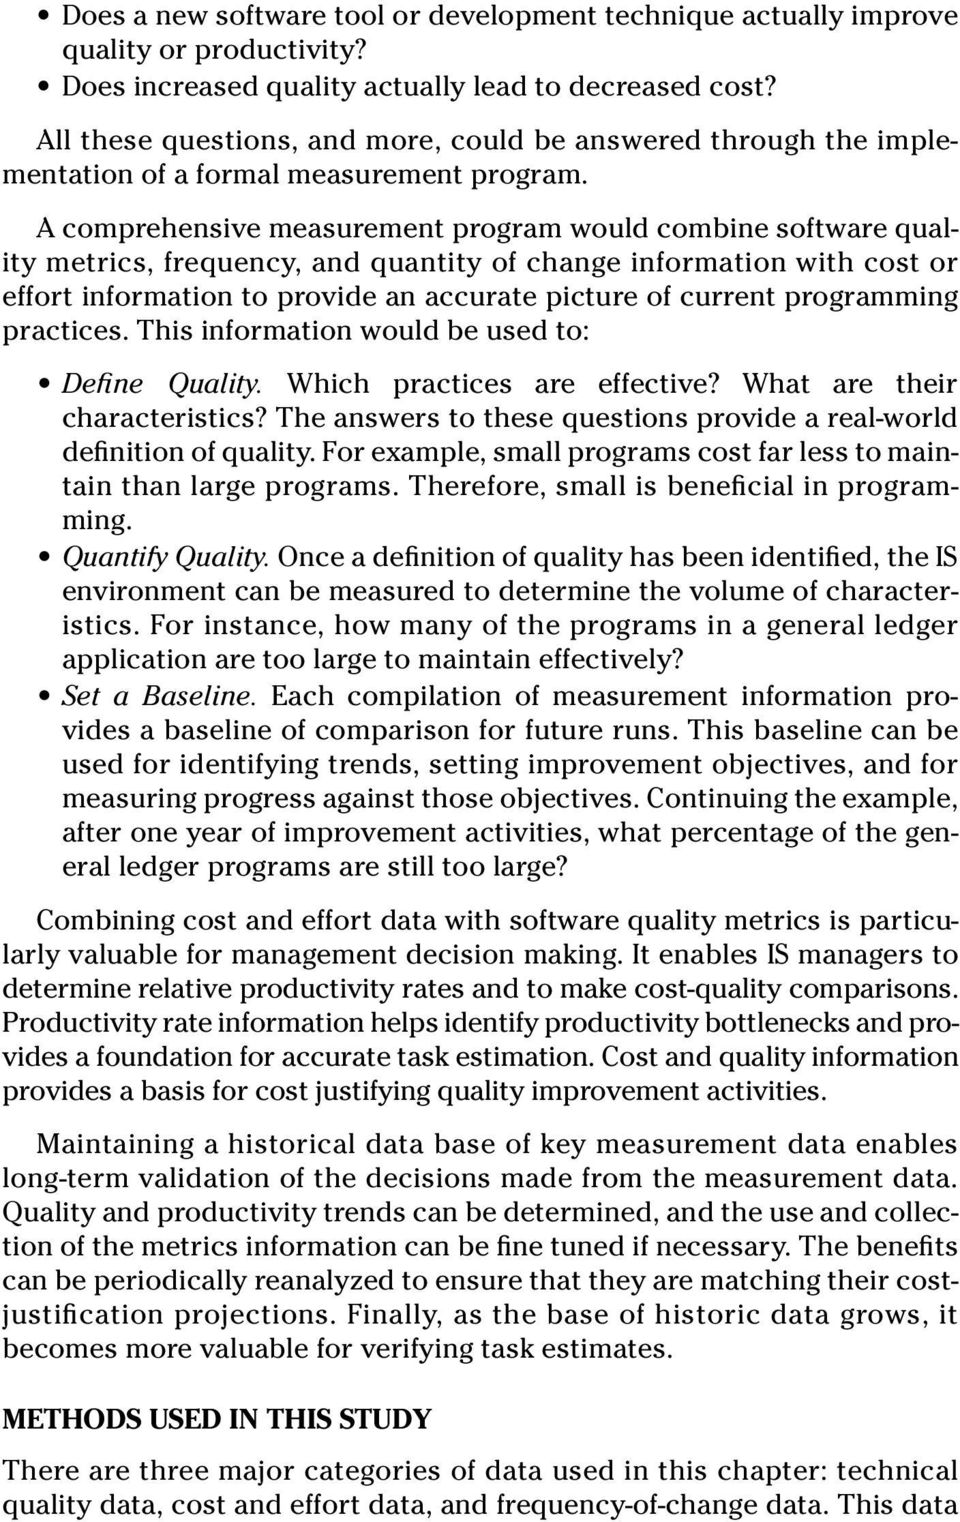 A comprehensive measurement program would combine software quality metrics, frequency, and quantity of change information with cost or effort information to provide an accurate picture of current